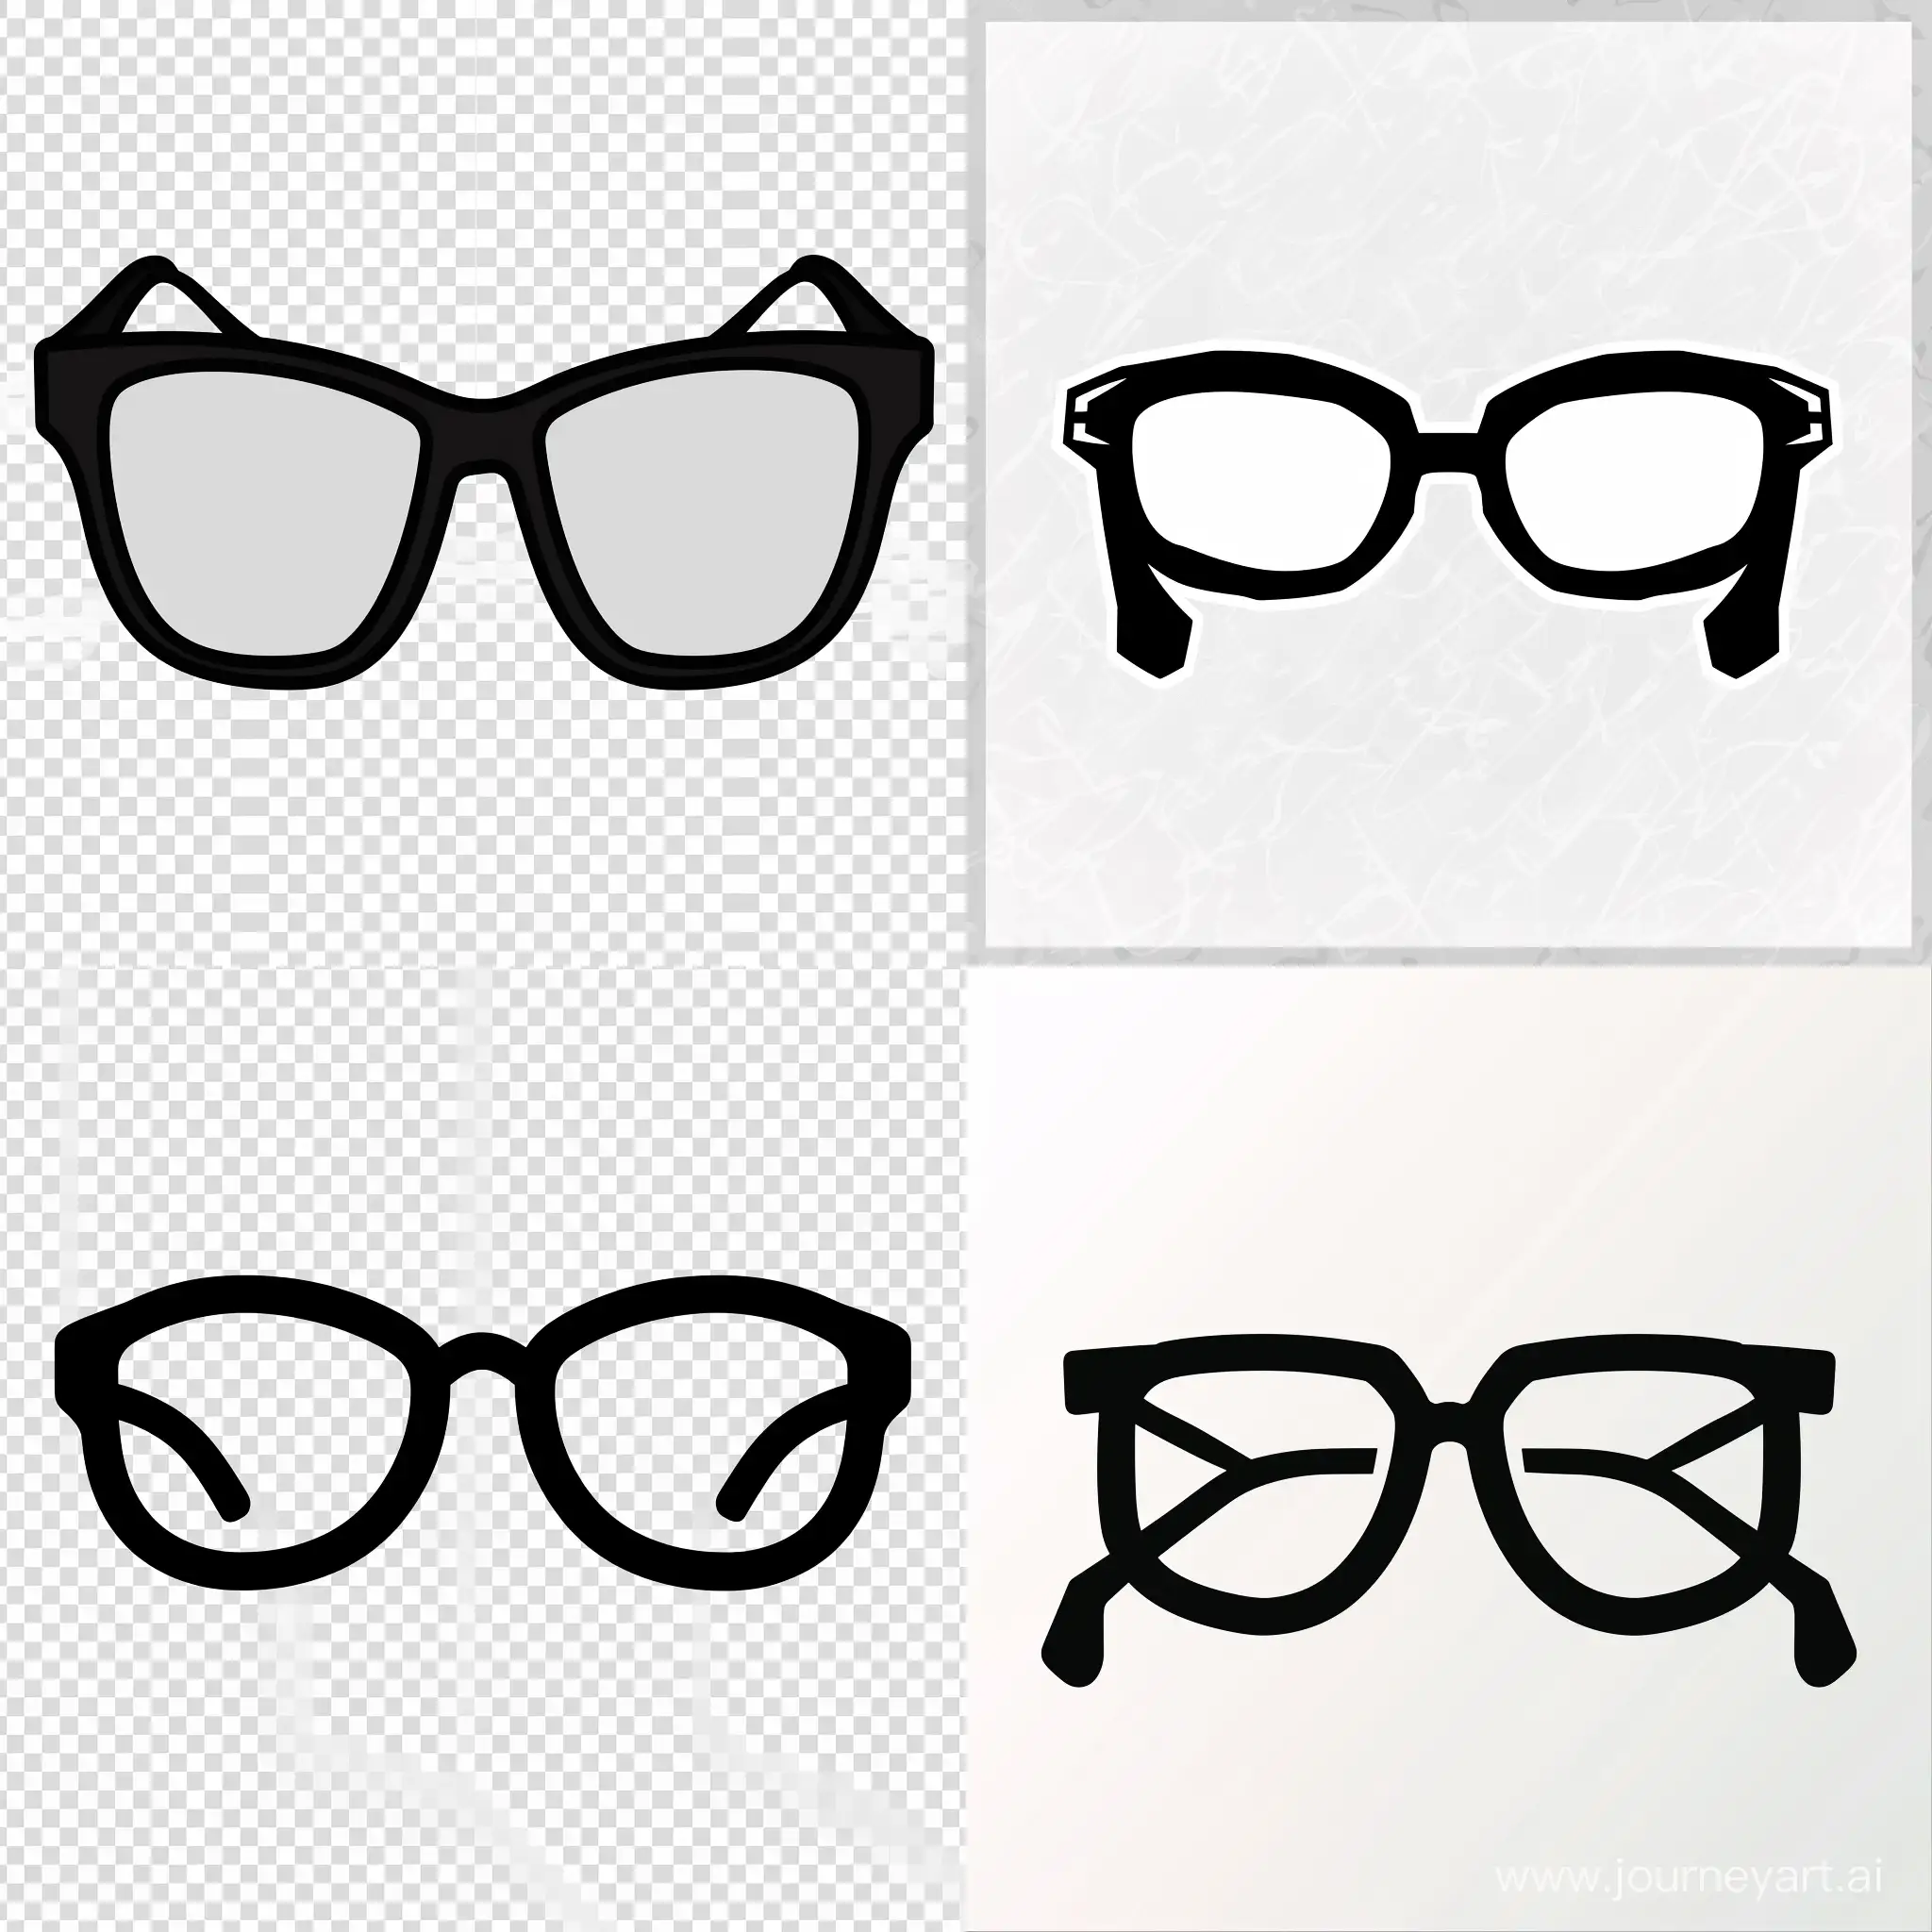 Create a 100x100 pixel icon featuring a black outline of glasses on a transparent background. The glasses should be depicted in an icon style, with side margins from the object to the edges set at 10 pixels